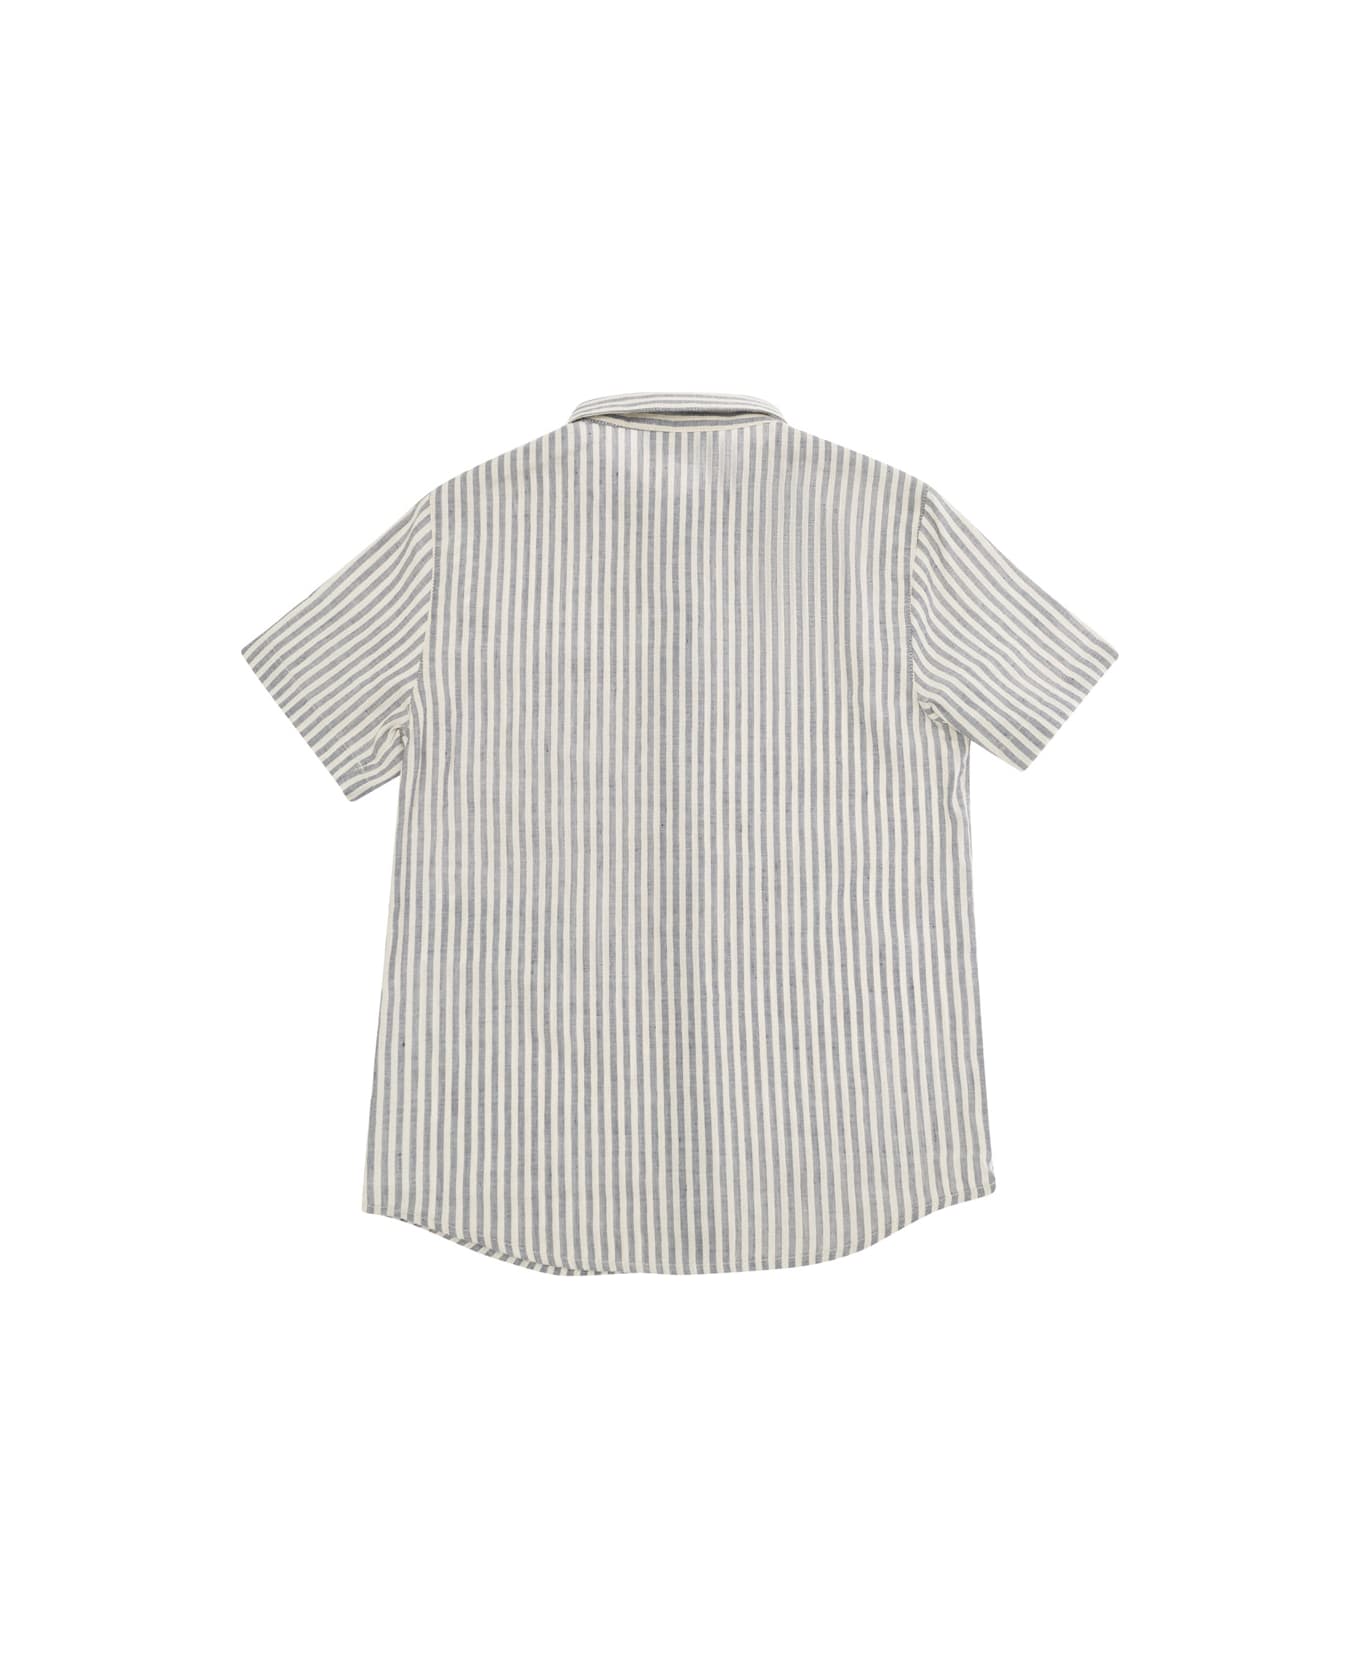 Emporio Armani Grey And White Stripe Shirt With Logo Embroidery In Cotton And Linen Boy - Multicolor